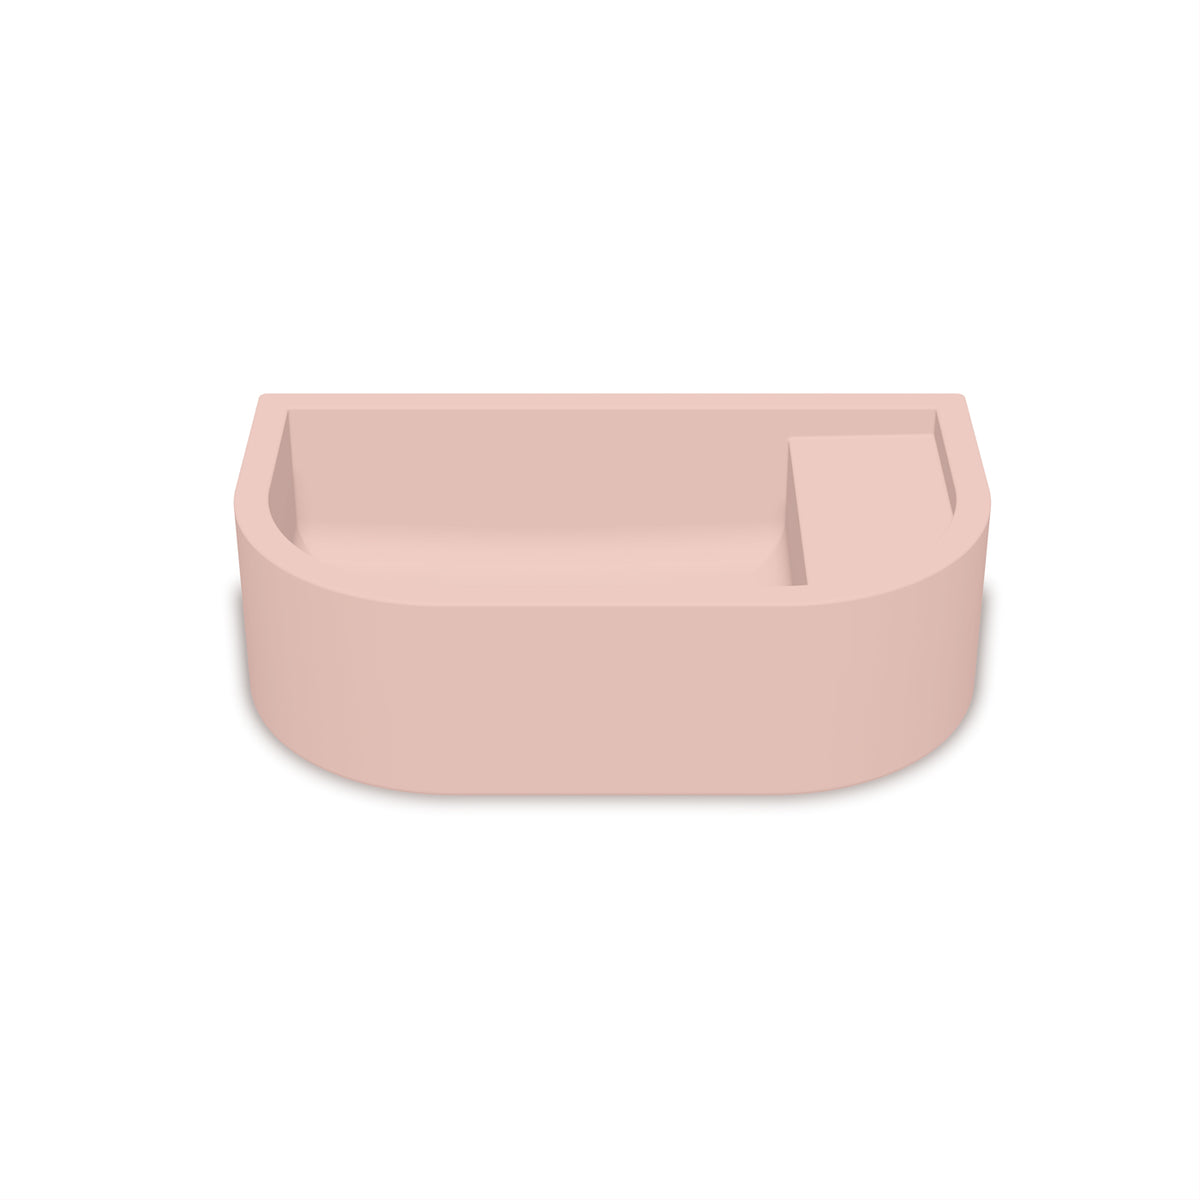 Loop 01 Basin - Overflow - Wall Hung (Blush Pink,No Tap Hole,Brass)